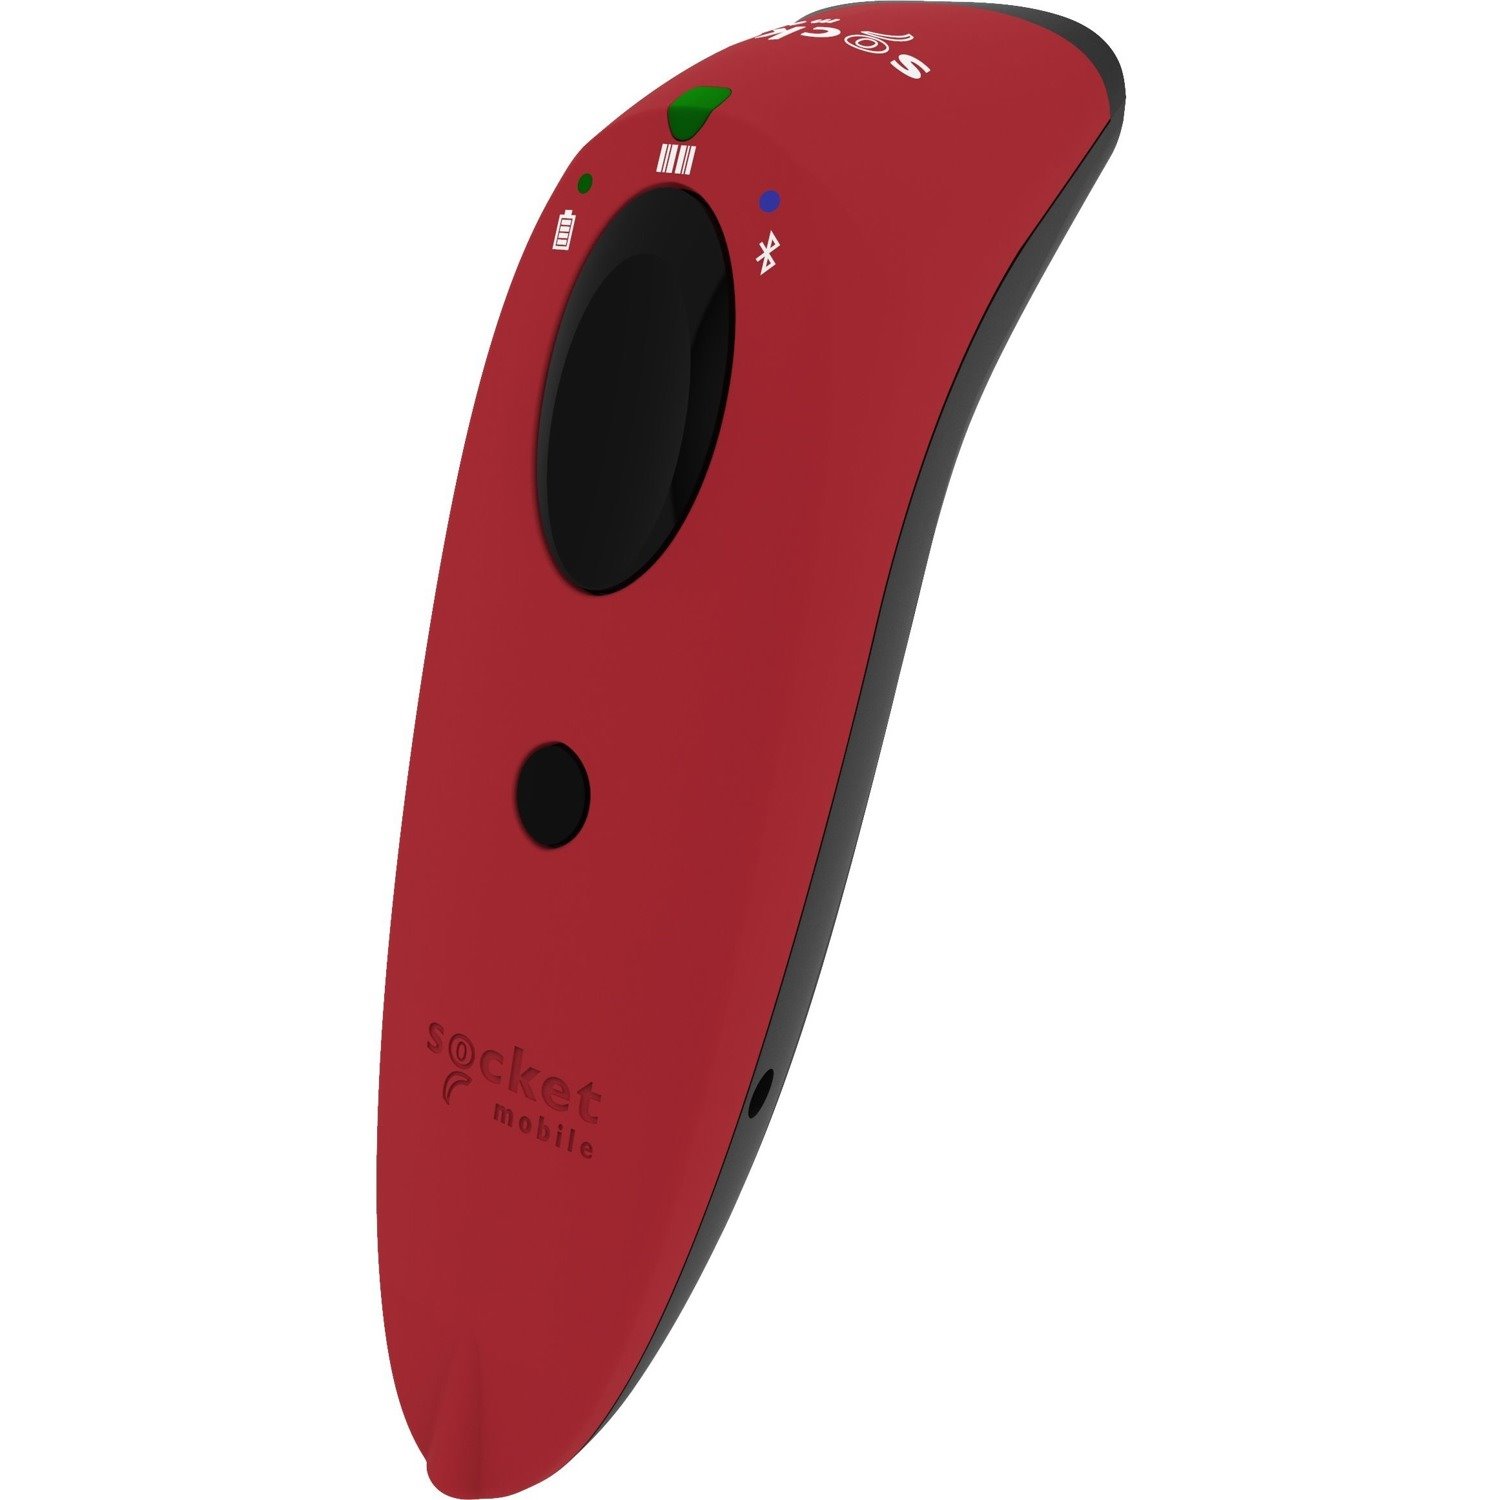 Socket Mobile SocketScan S720 Handheld Barcode Scanner - Wireless Connectivity - Red